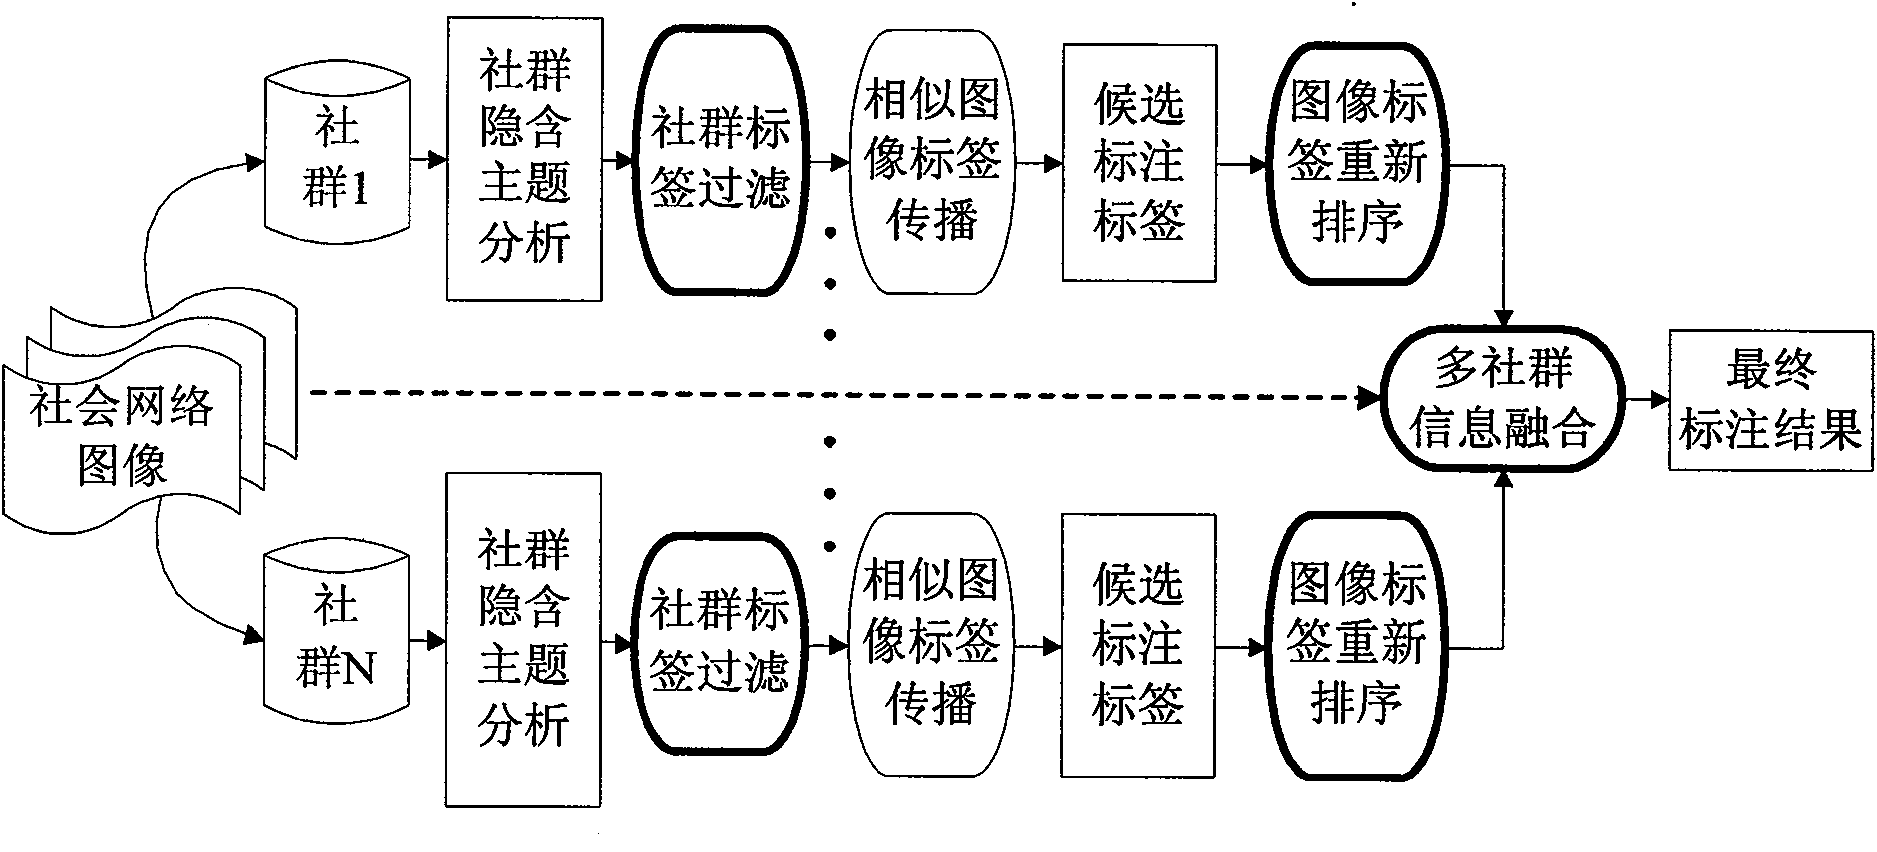 Method for automatically labeling images based on community potential subject excavation